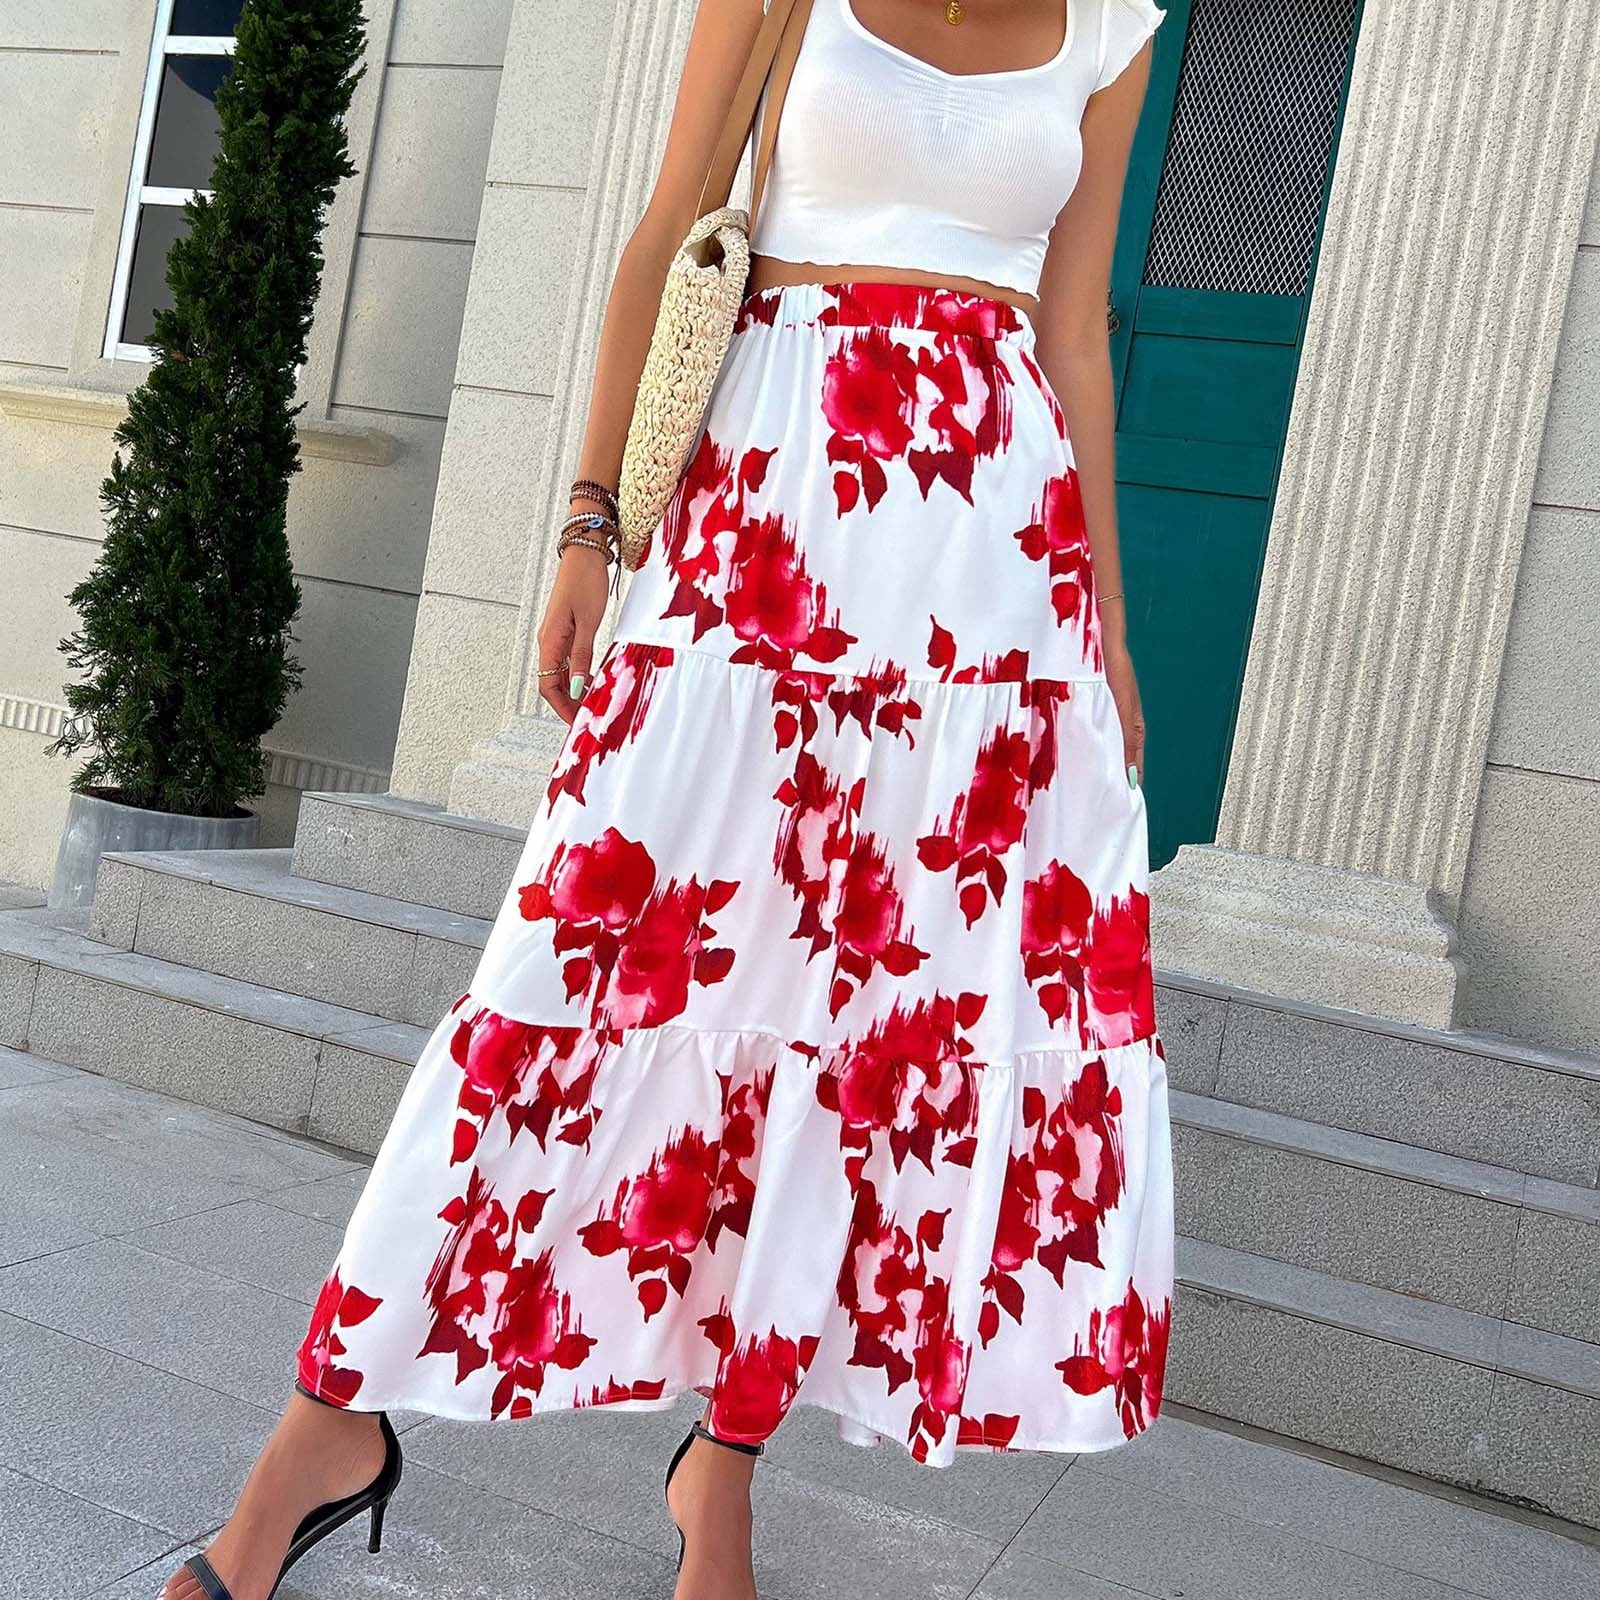 Shake up Your Maxi Skirts - Here's 7 Different Ways to Wear Them ...